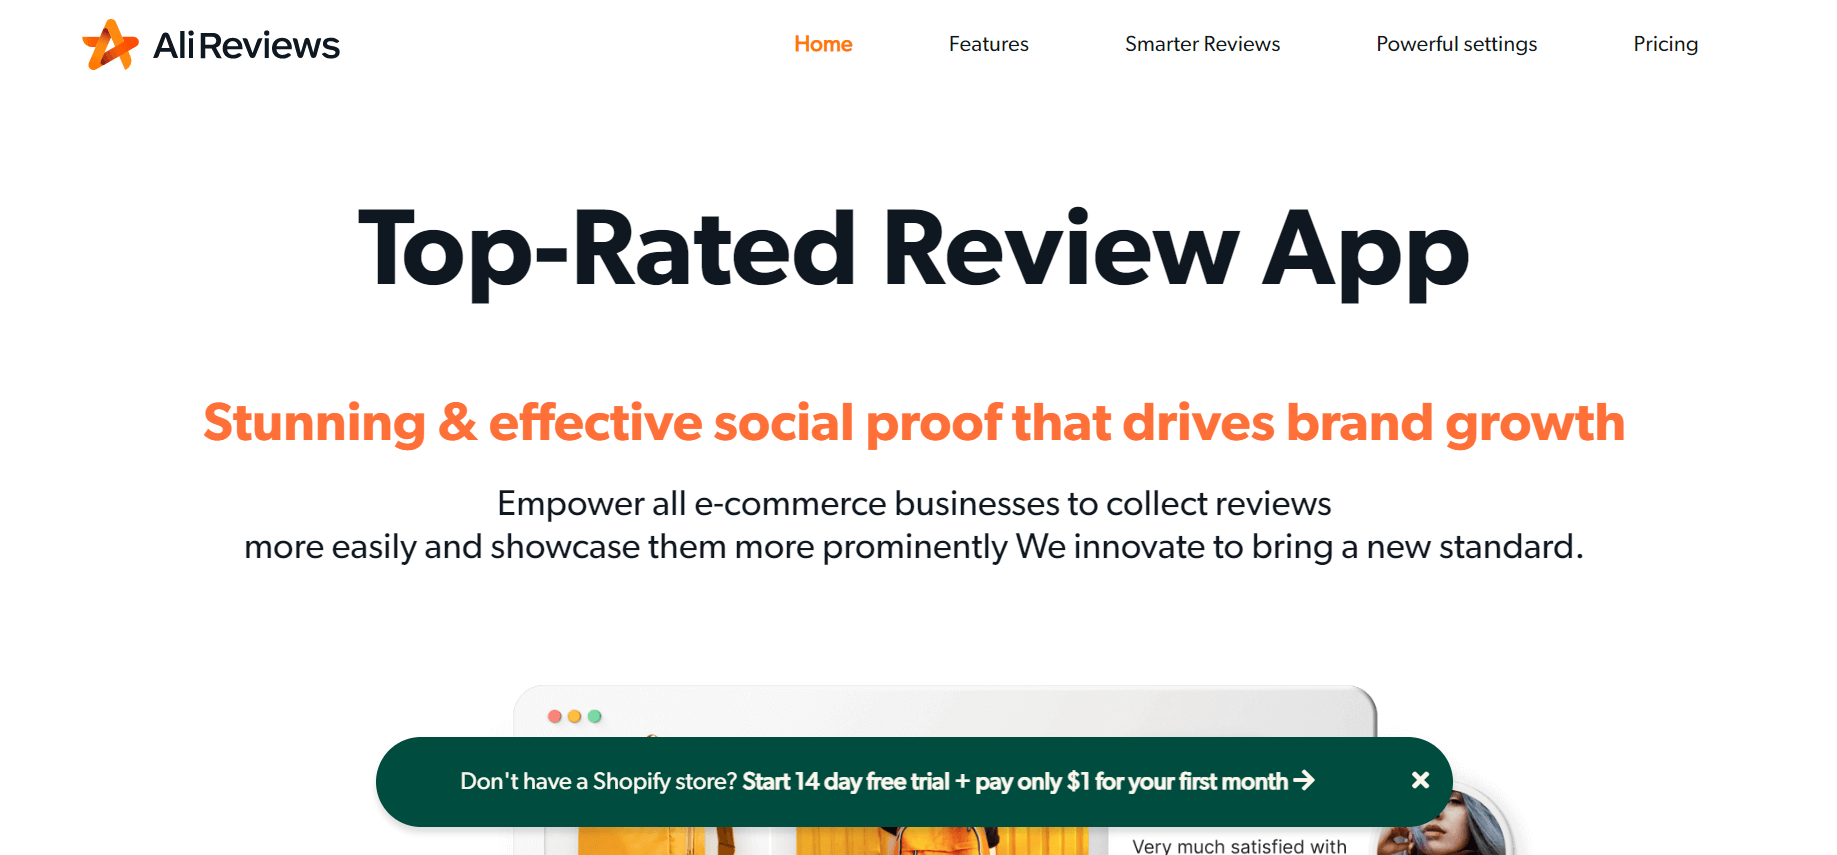 Ali Reviews is a great app for getting eCommerce product reviews